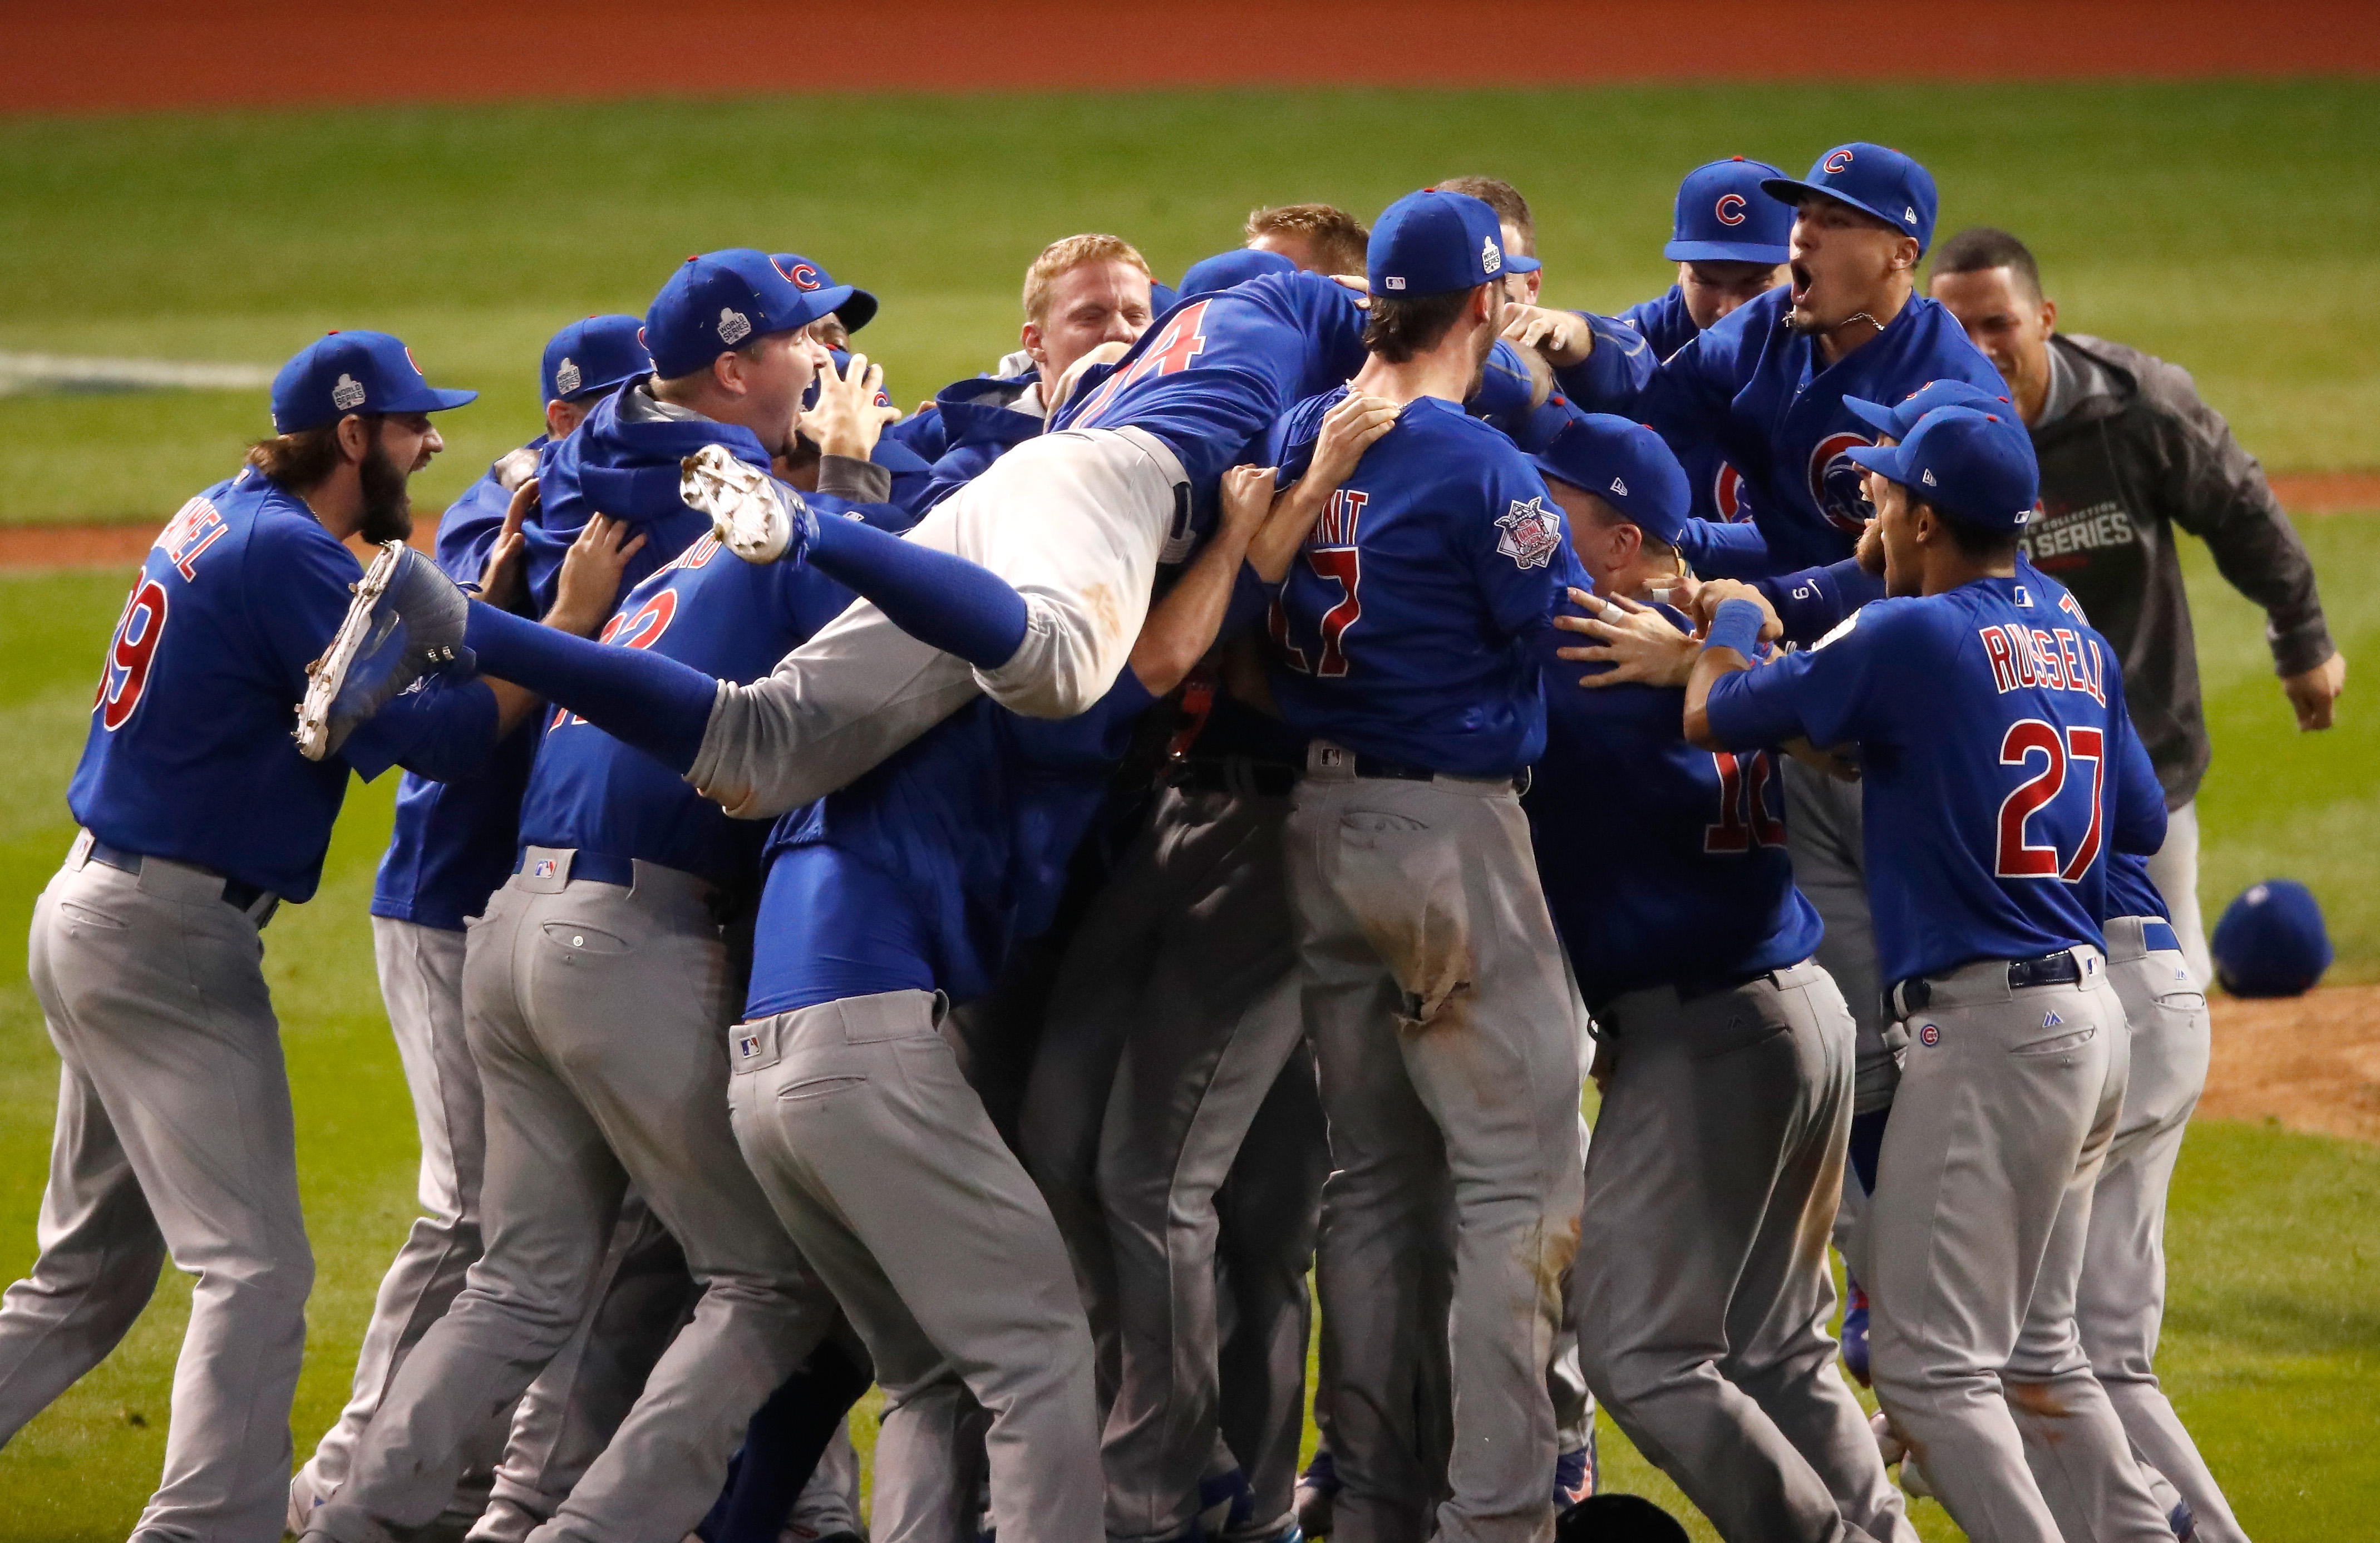 Cubs, Indians duel in most tweeted World Series of all time - CNET